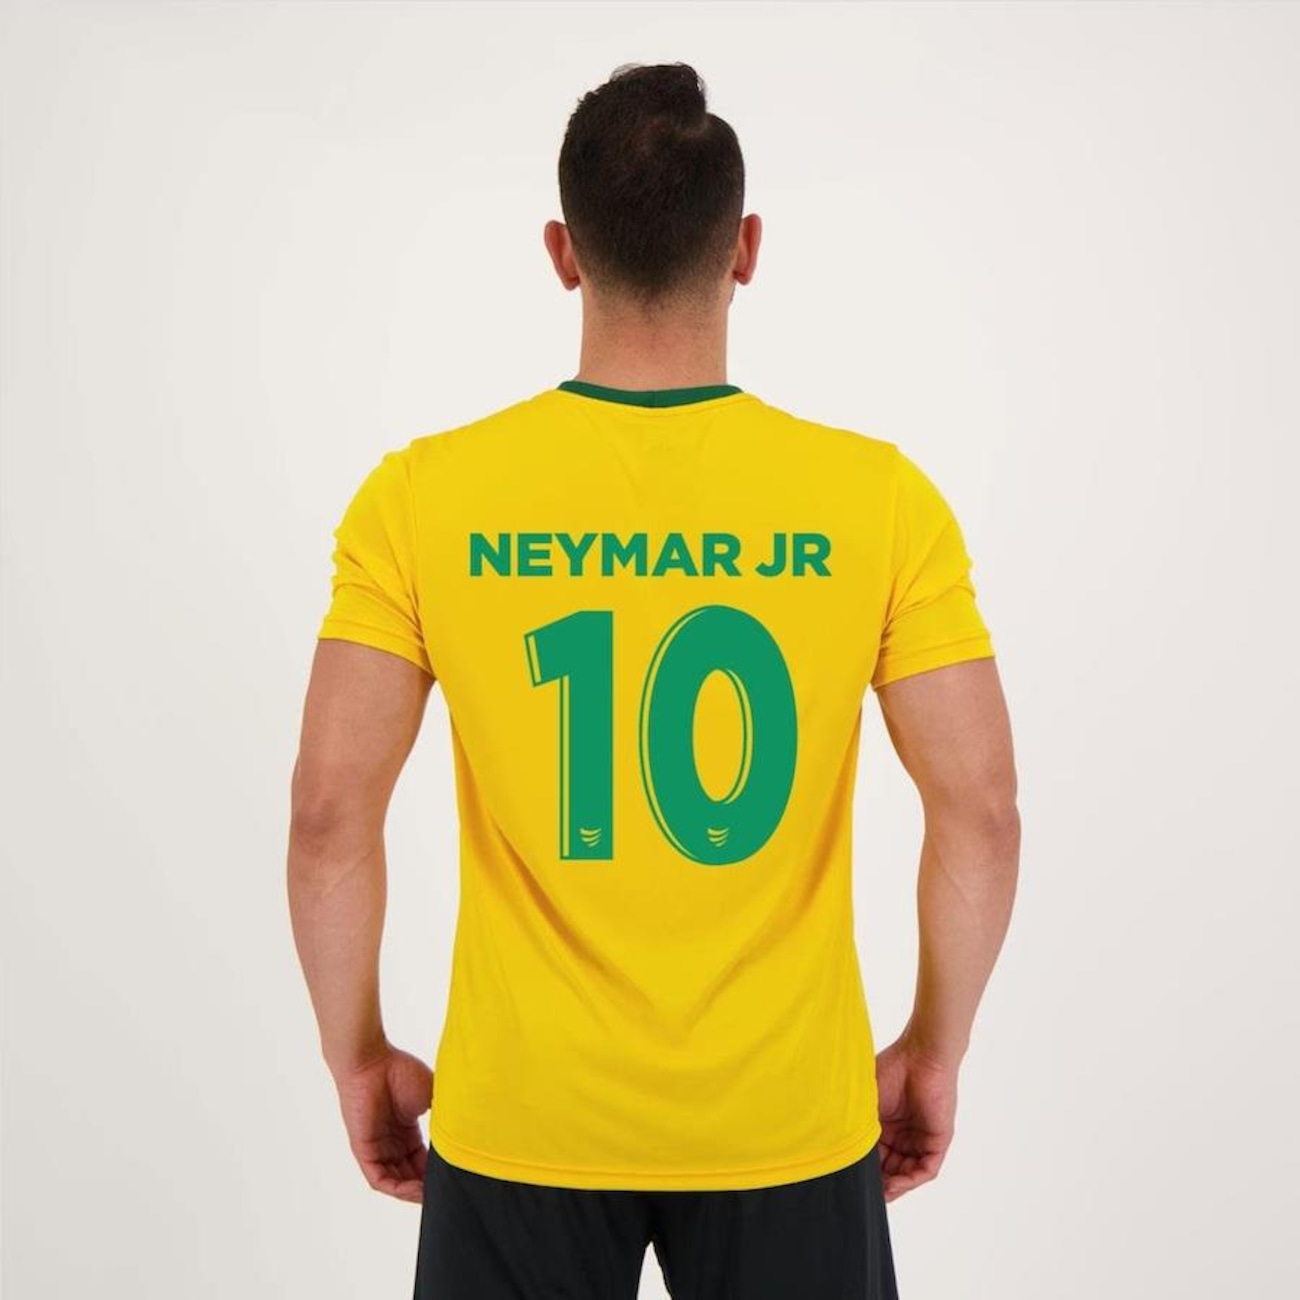 Neymar Sports Soccer/Football Brazil Home Jersey Tshirt with Black Shorts  Sports Jersey for Men and Boys L299